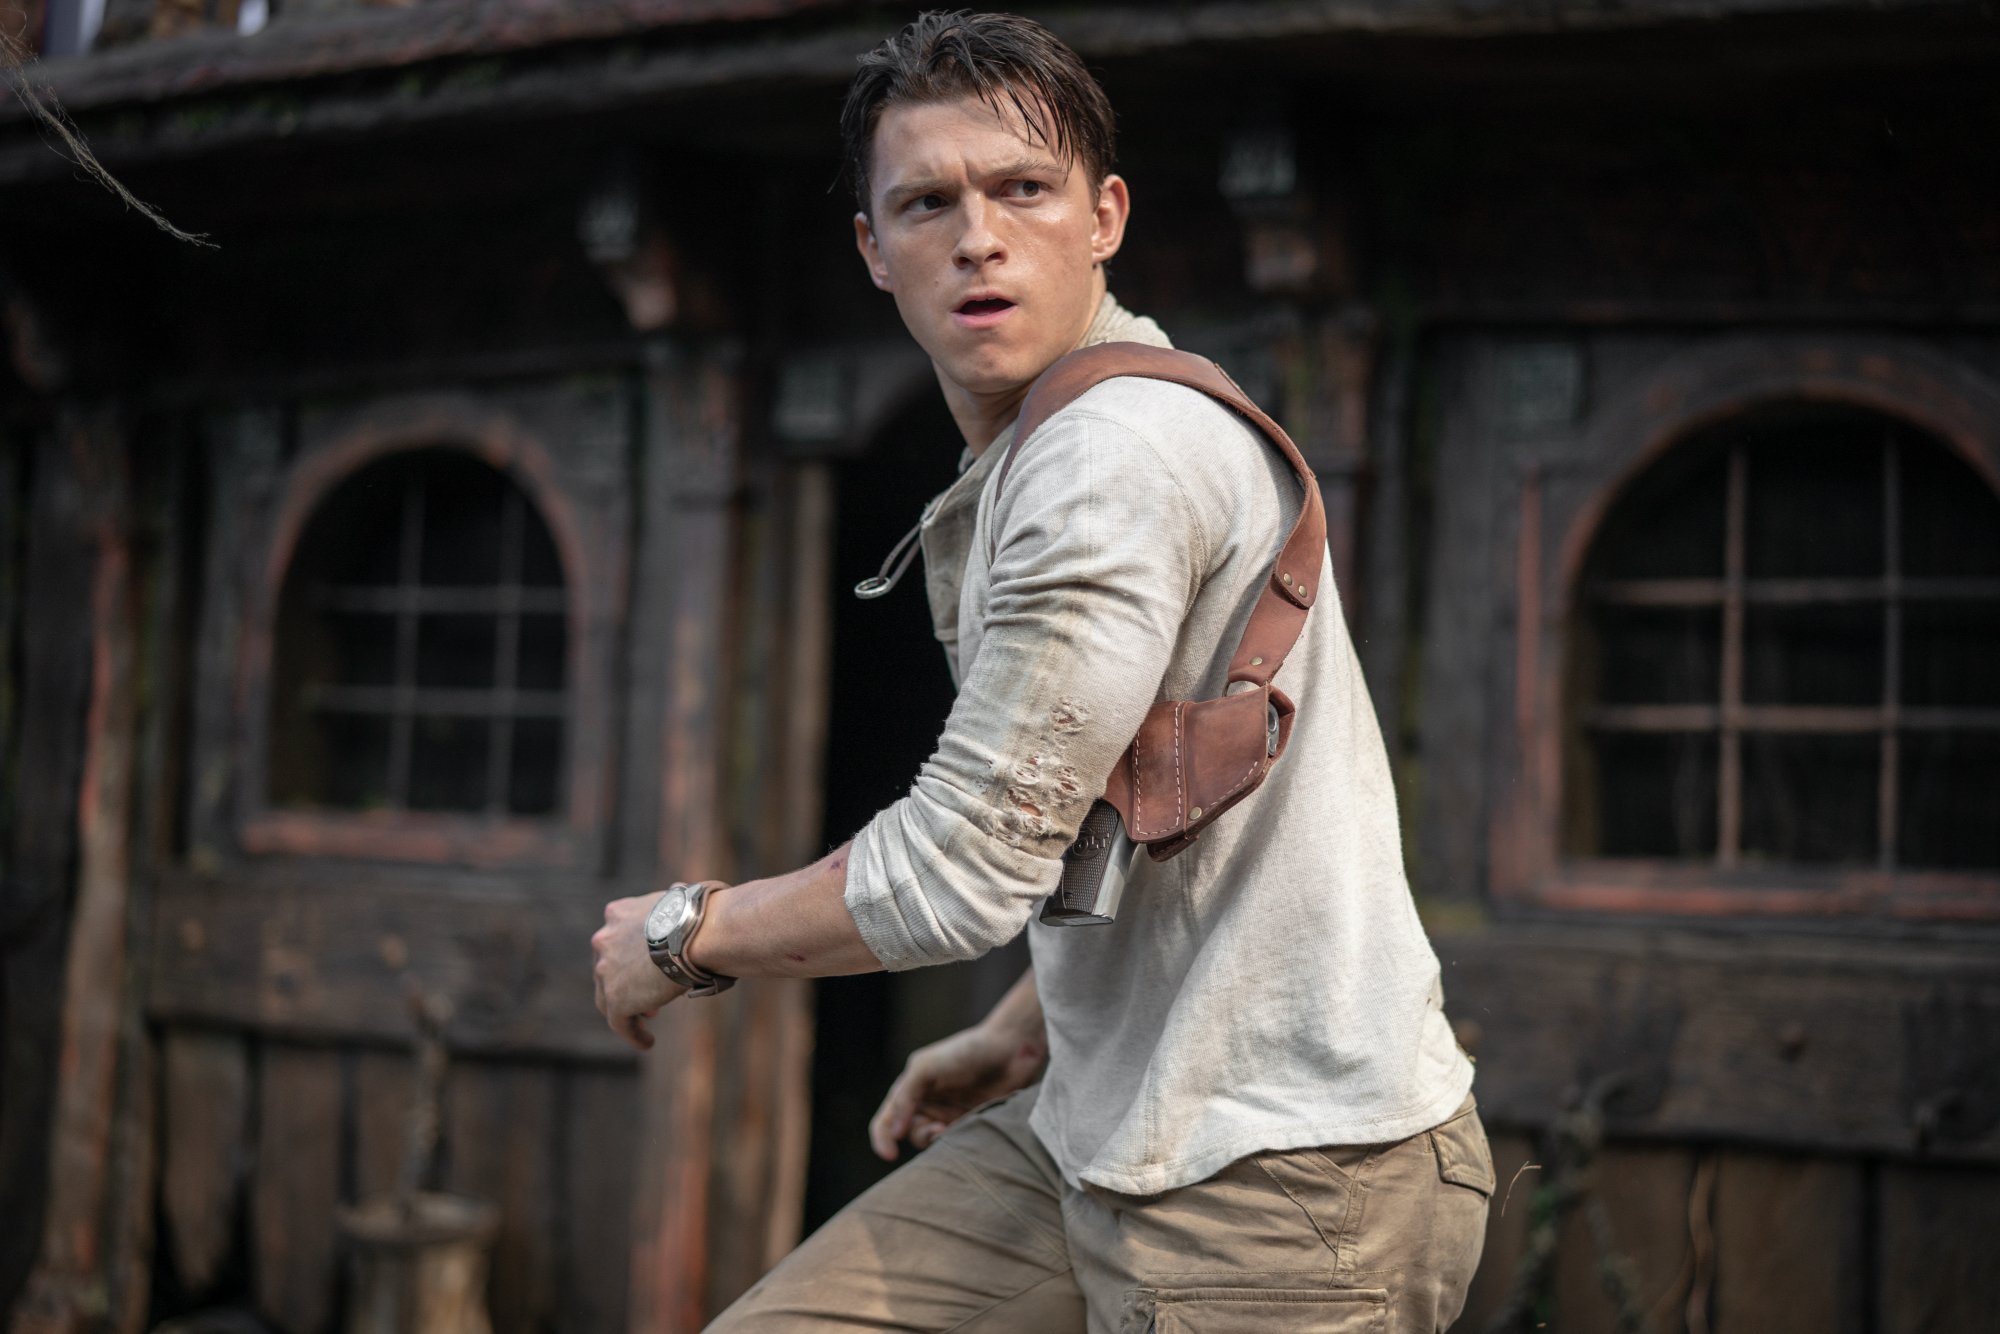 Uncharted' Movie Review: Tom Holland Brings Too Much Spider-Man Into Nathan  Drake